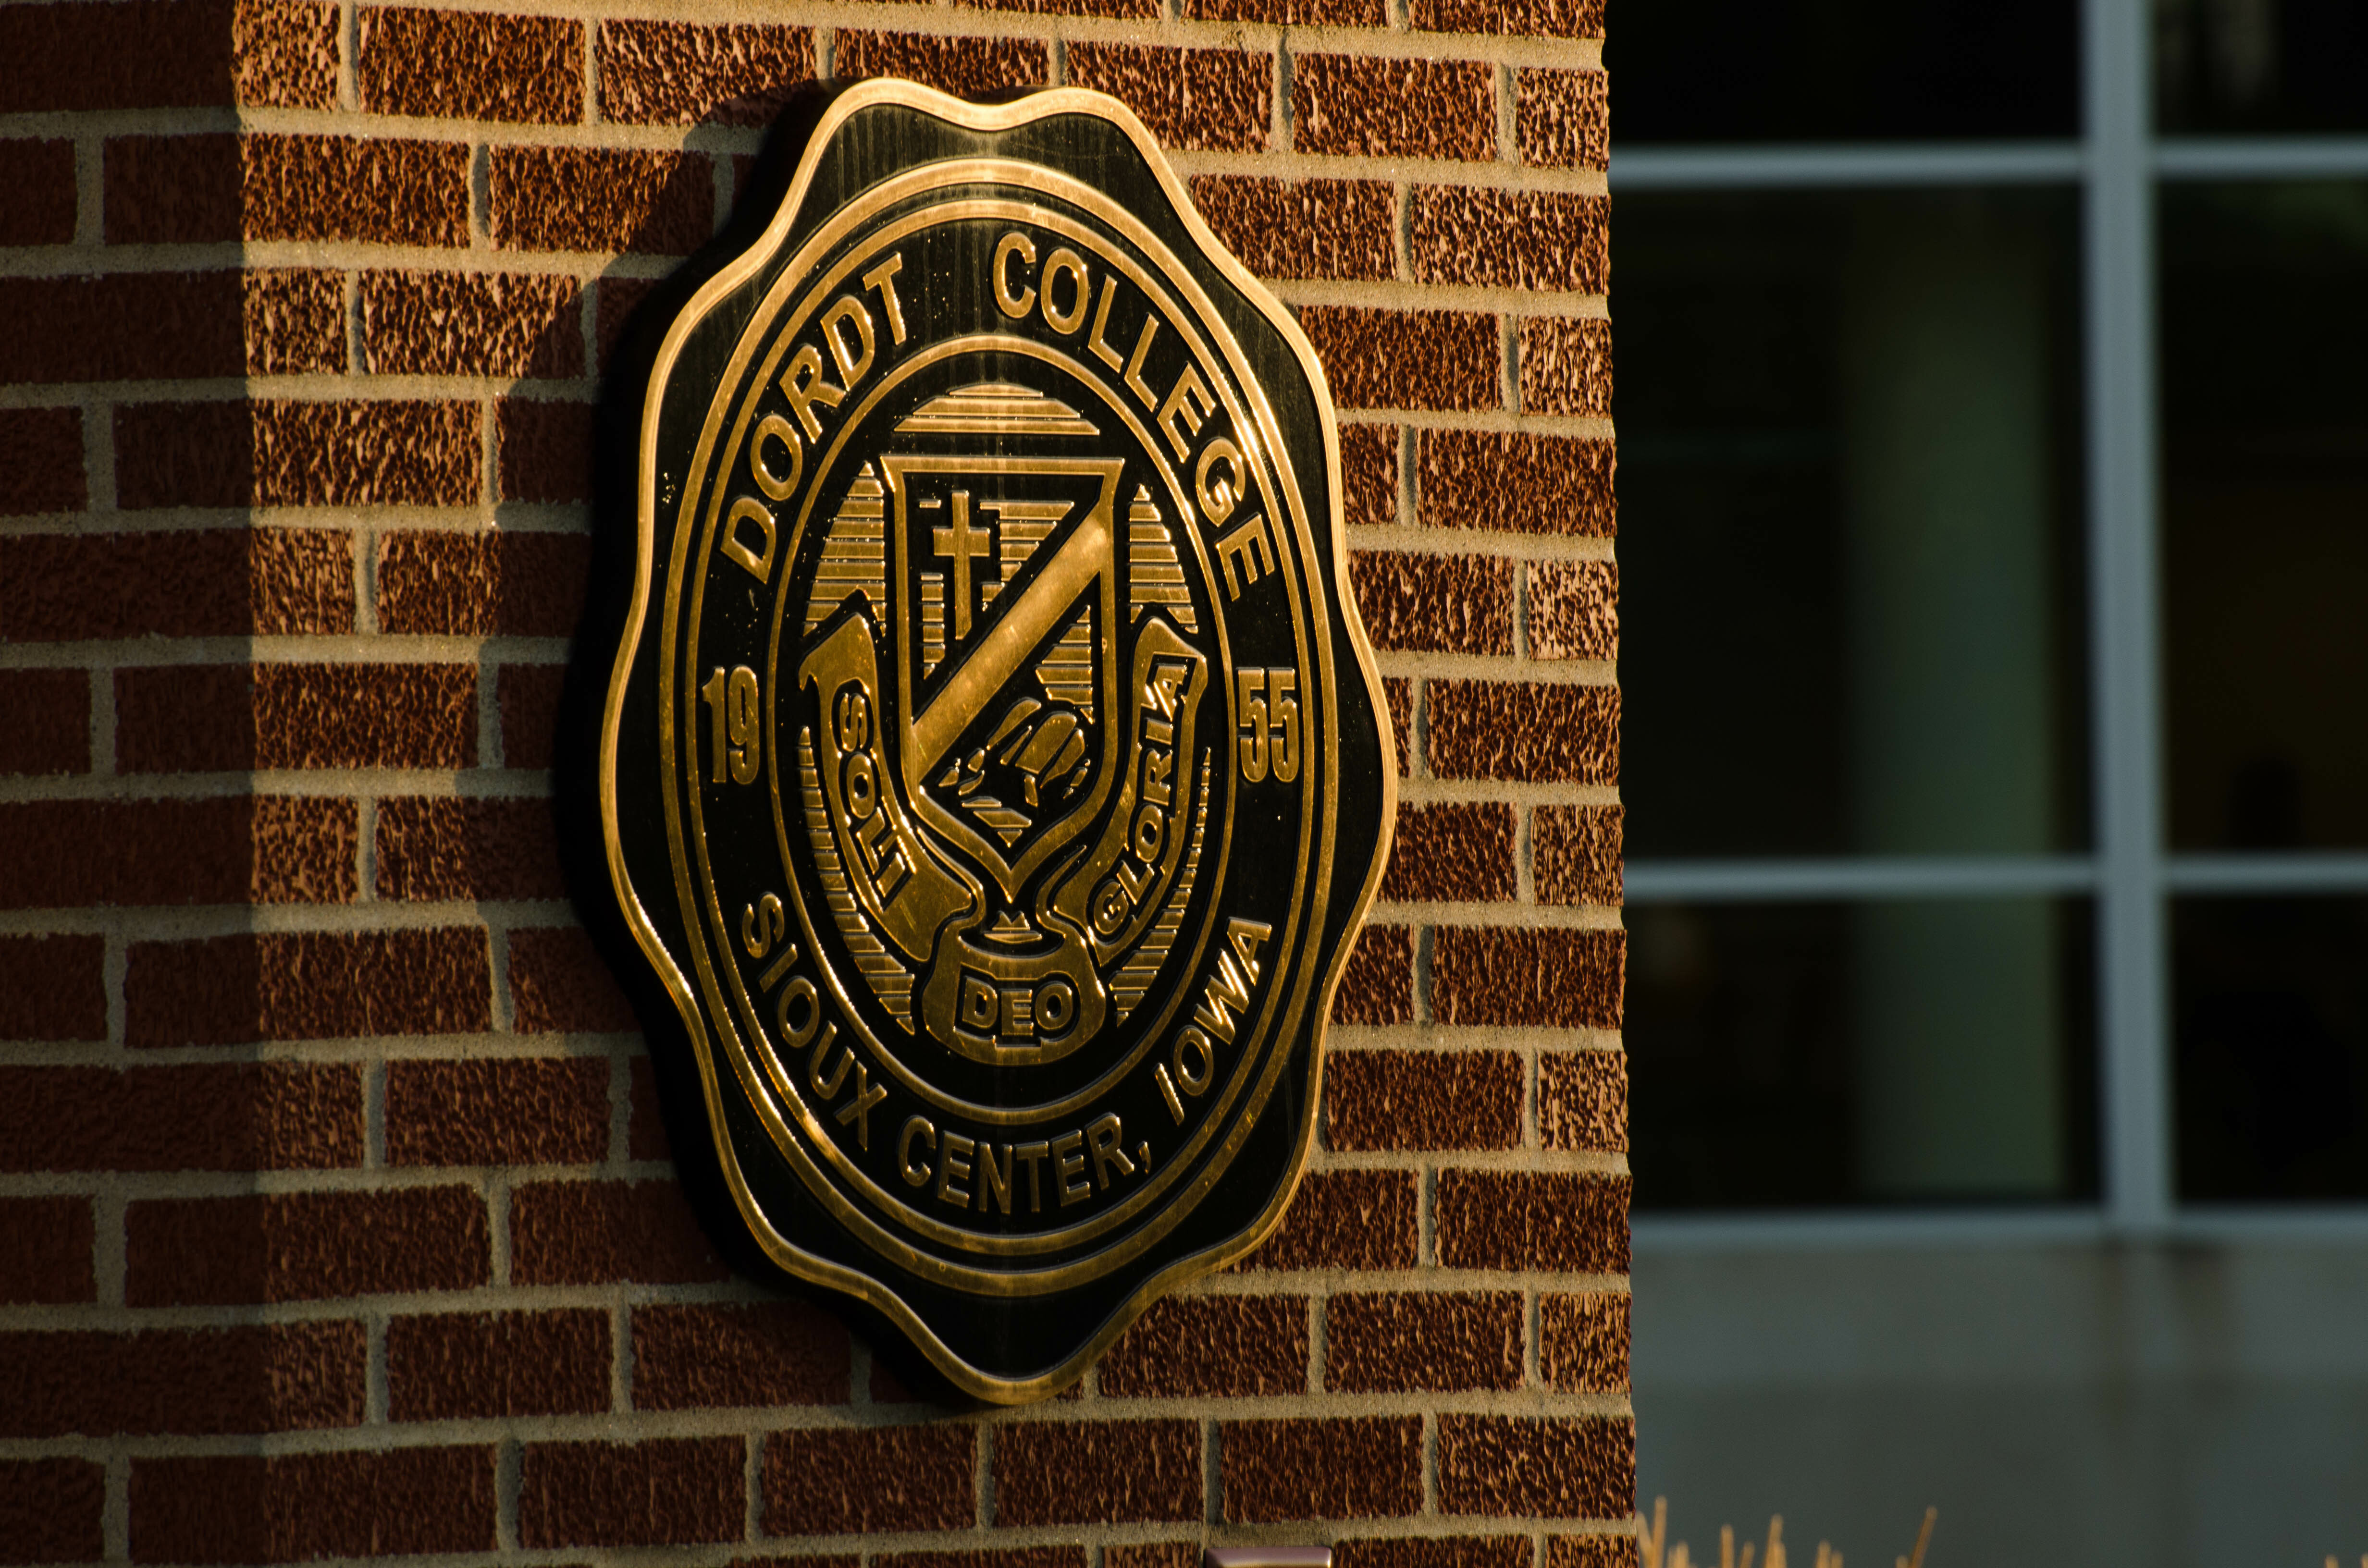 A picture of the Dordt College Seal